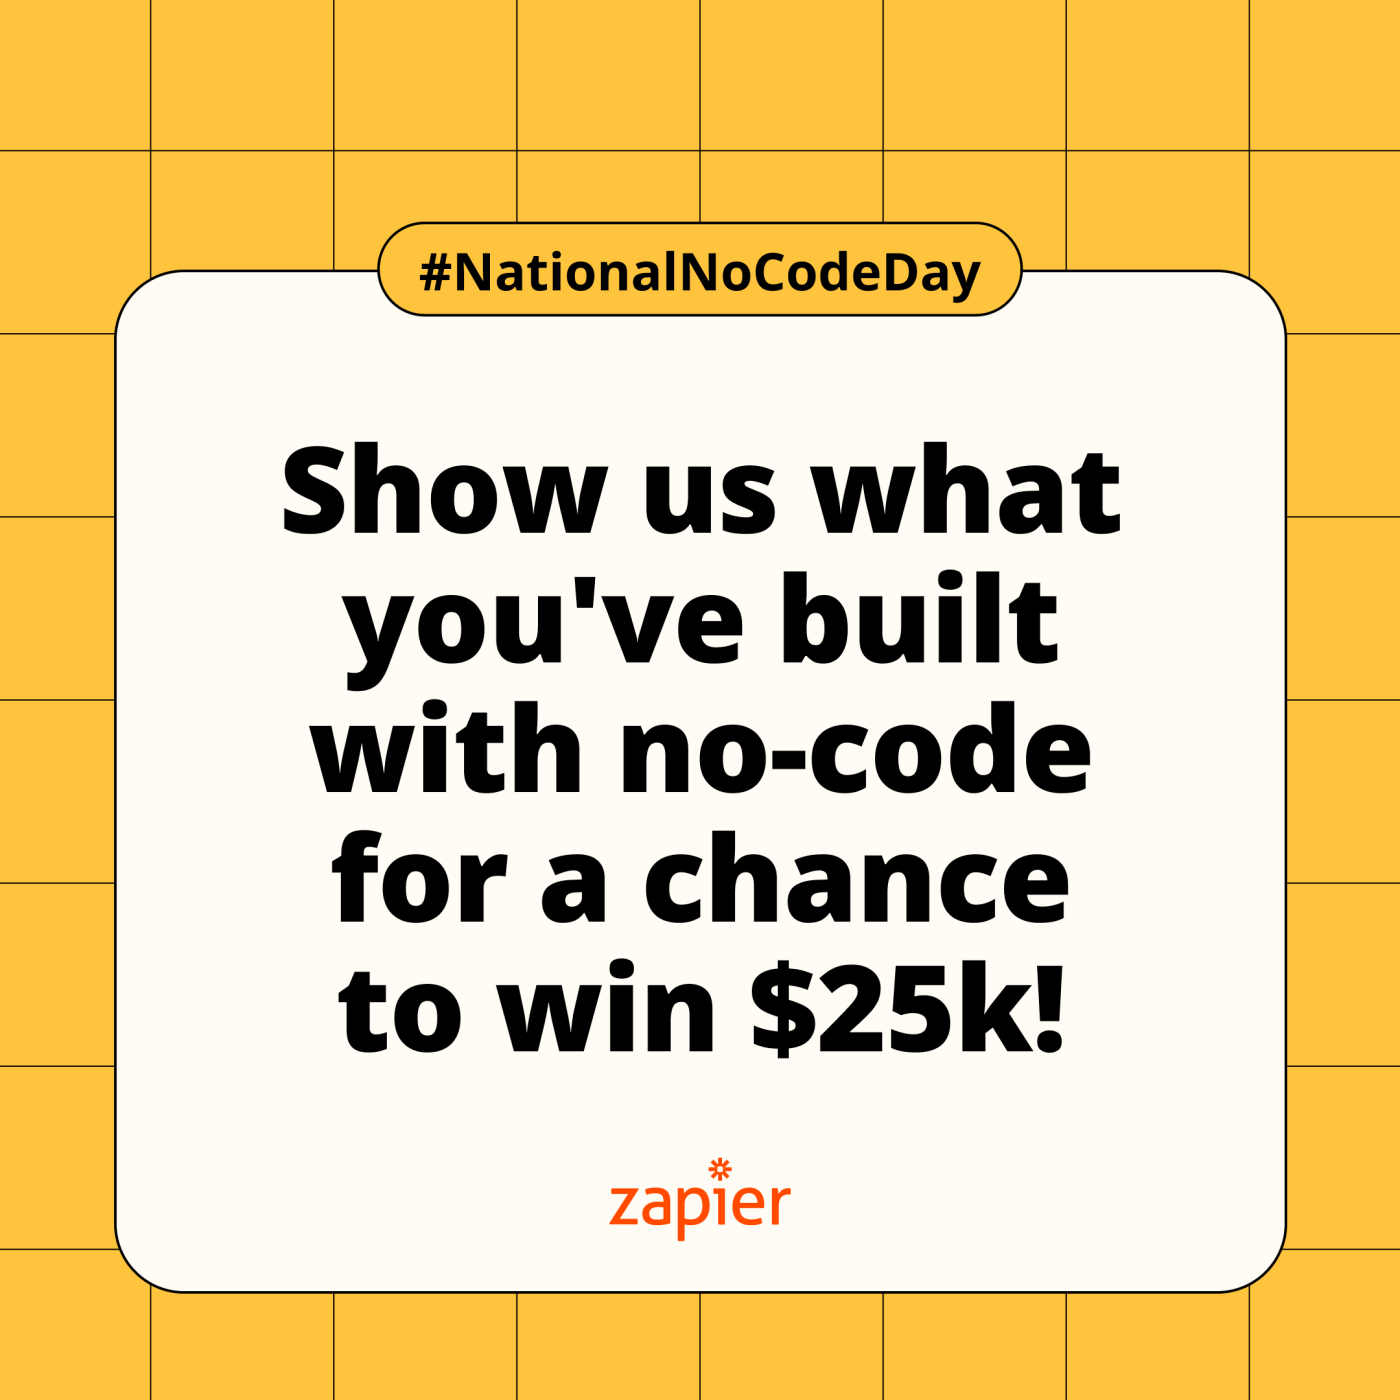 "Show us what you've built with no-code for a chance to with $25k!"